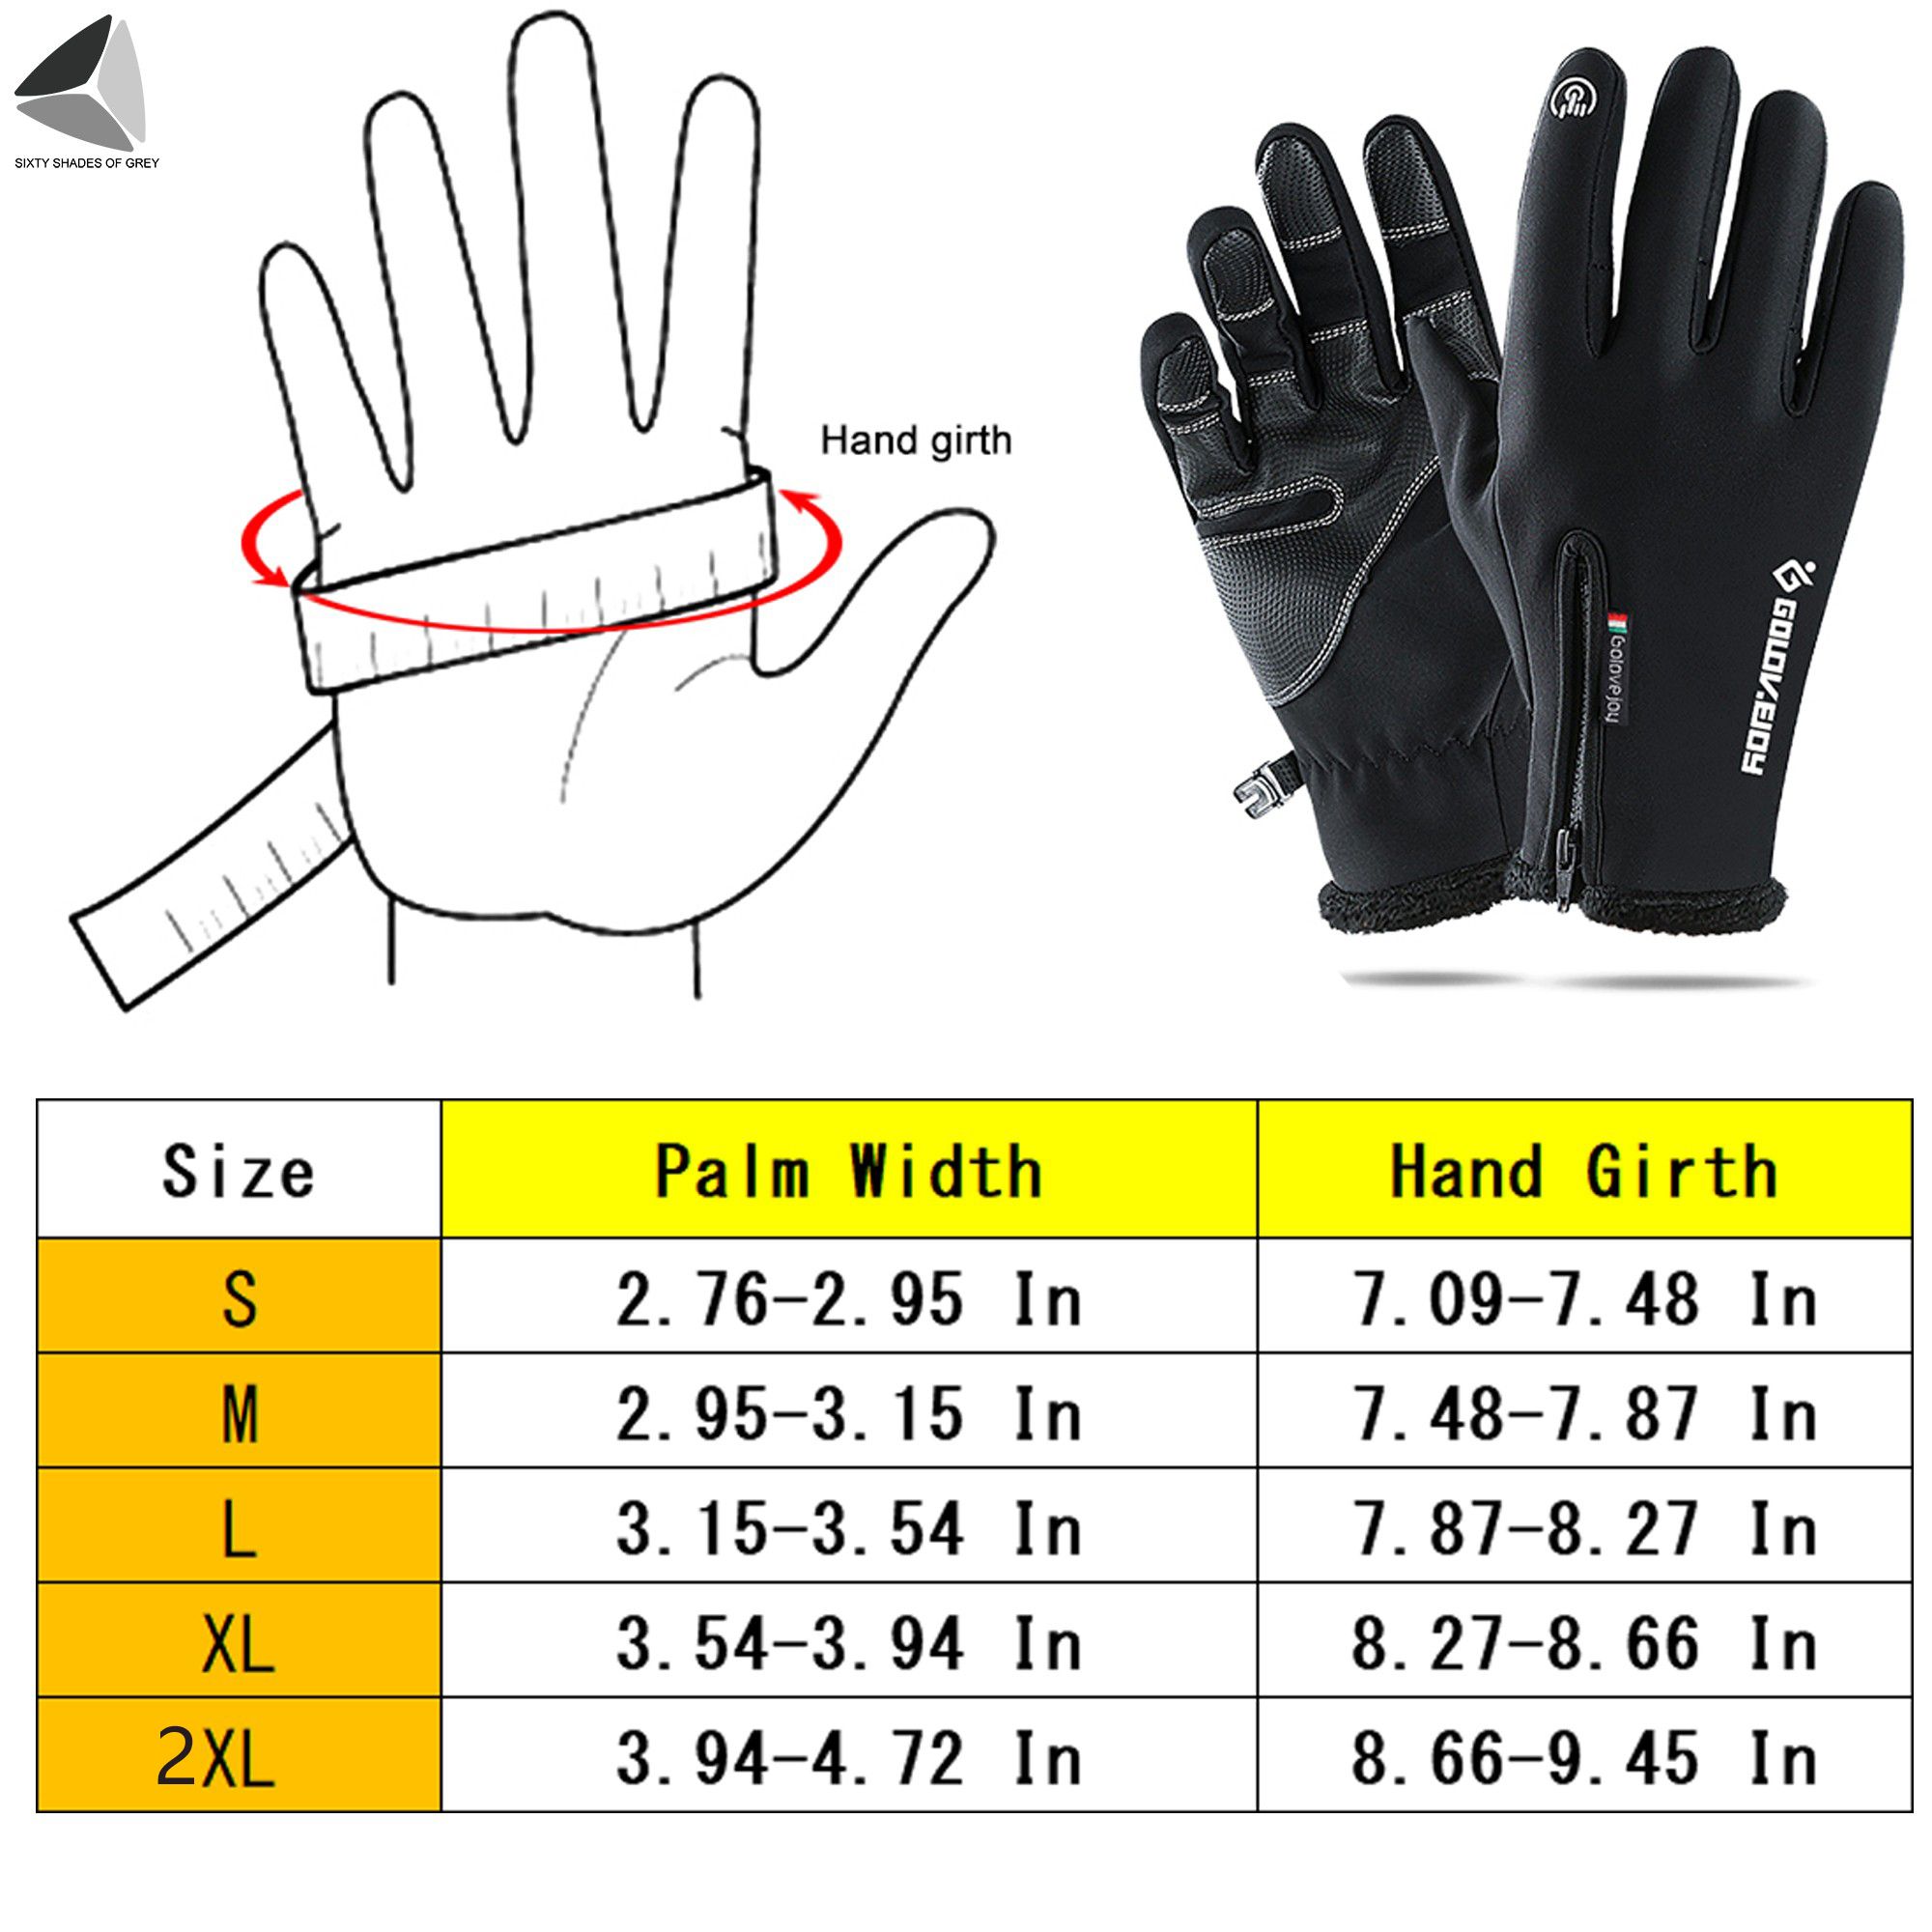 PULLIMORE 2 Pairs Winter Warm Gloves for Men Women Waterproof Touchscreen Gloves Non-Slip Mittens for Skiing Driving Cycling Running (2XL, Black) - image 2 of 9